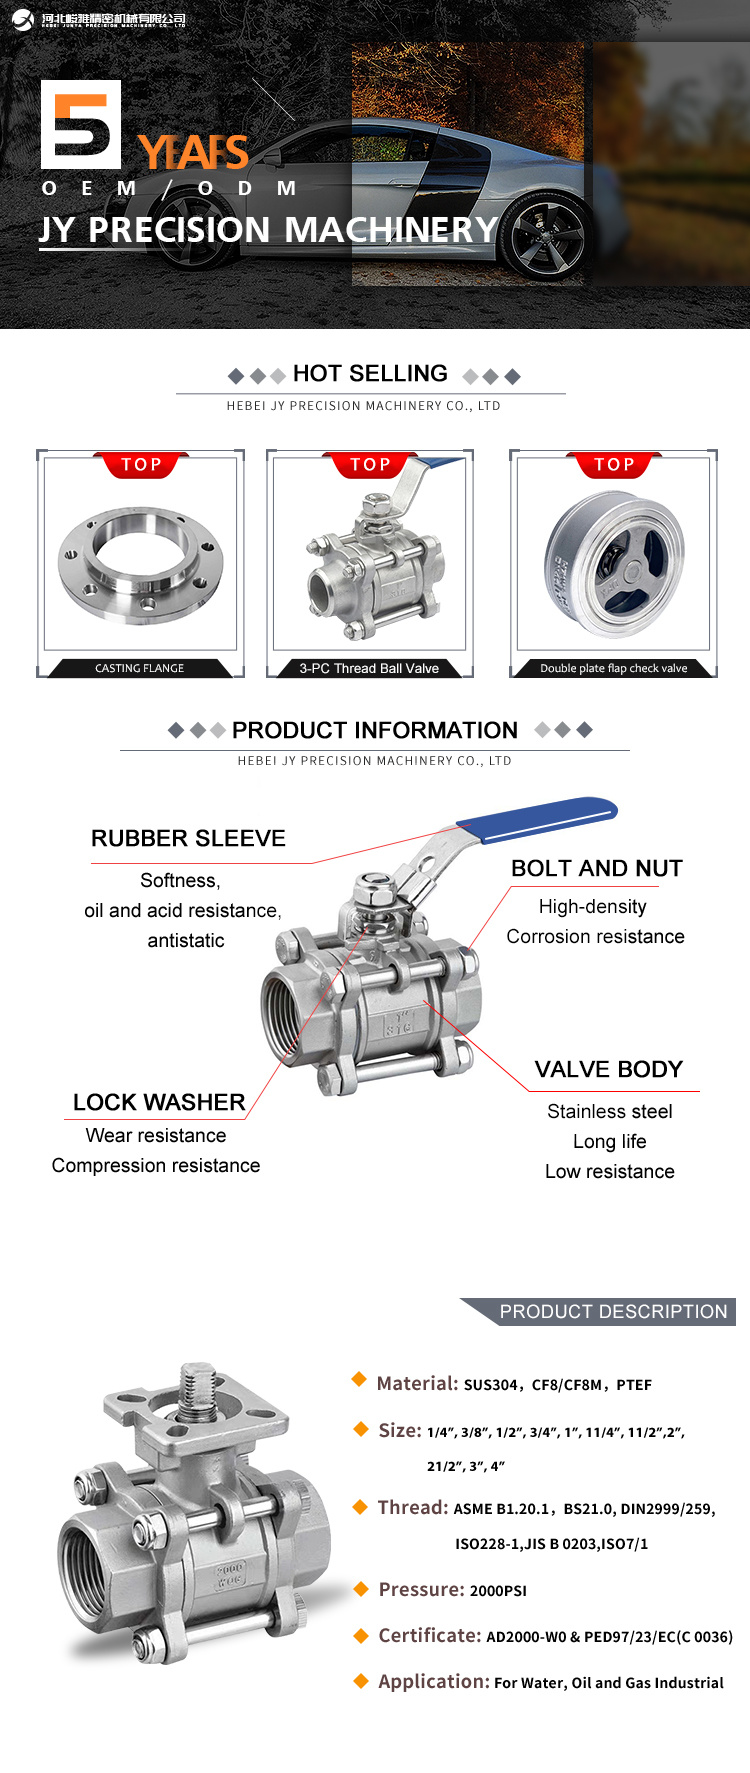 CNC Machine Factory Direct Precision Casting Lost Wax Casting Stainless Steel Vehicle/Valve/Auto/Trailer/Agricultural/Engine/Motorcycl/Plumbing Accessories